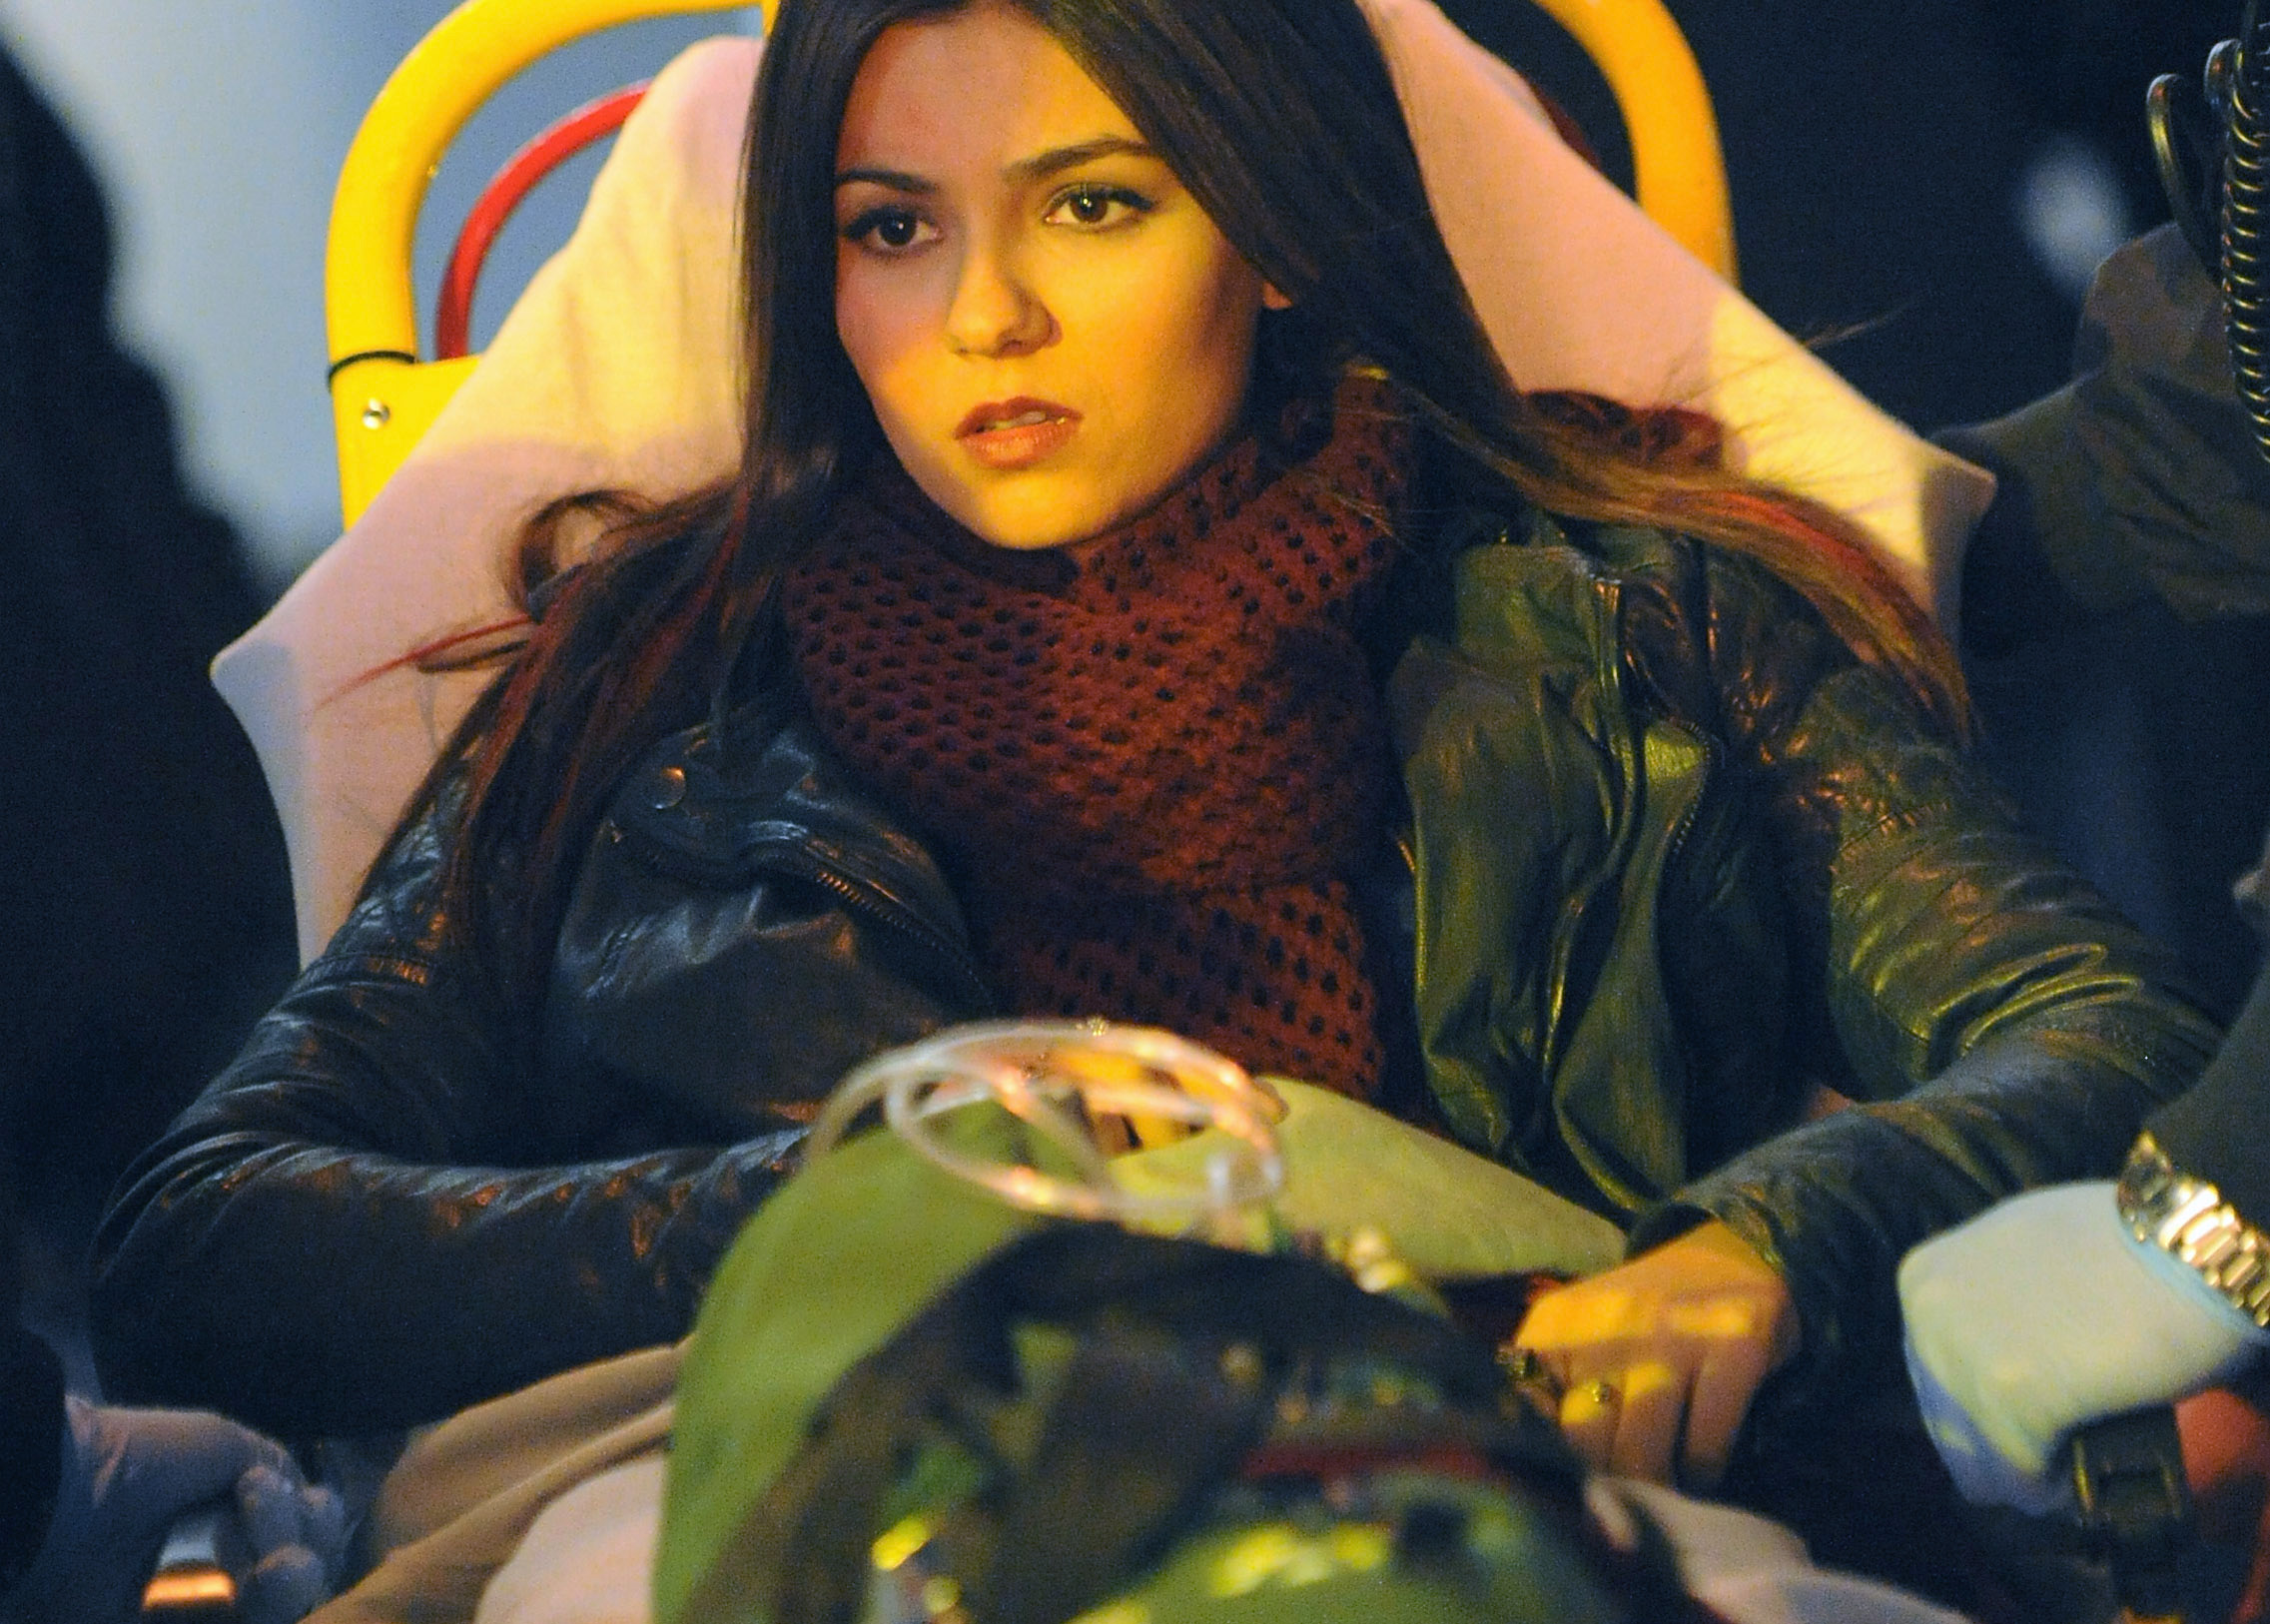 MTV Cancels Victoria Justice's TV Show Eye Candy